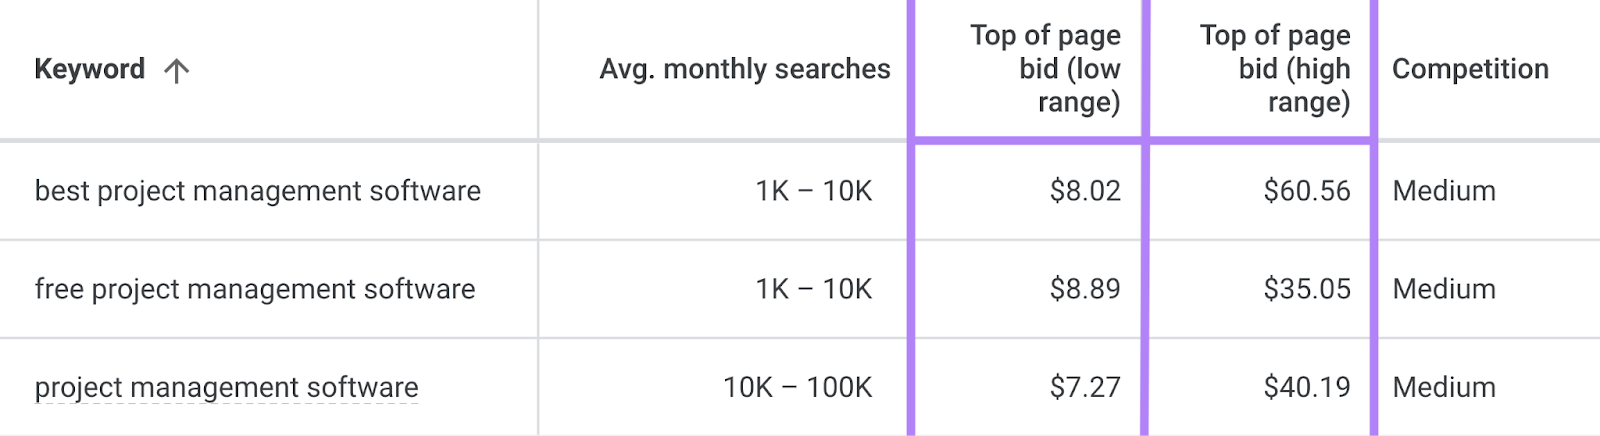 Google Keyword Planner shows data for top of page bids